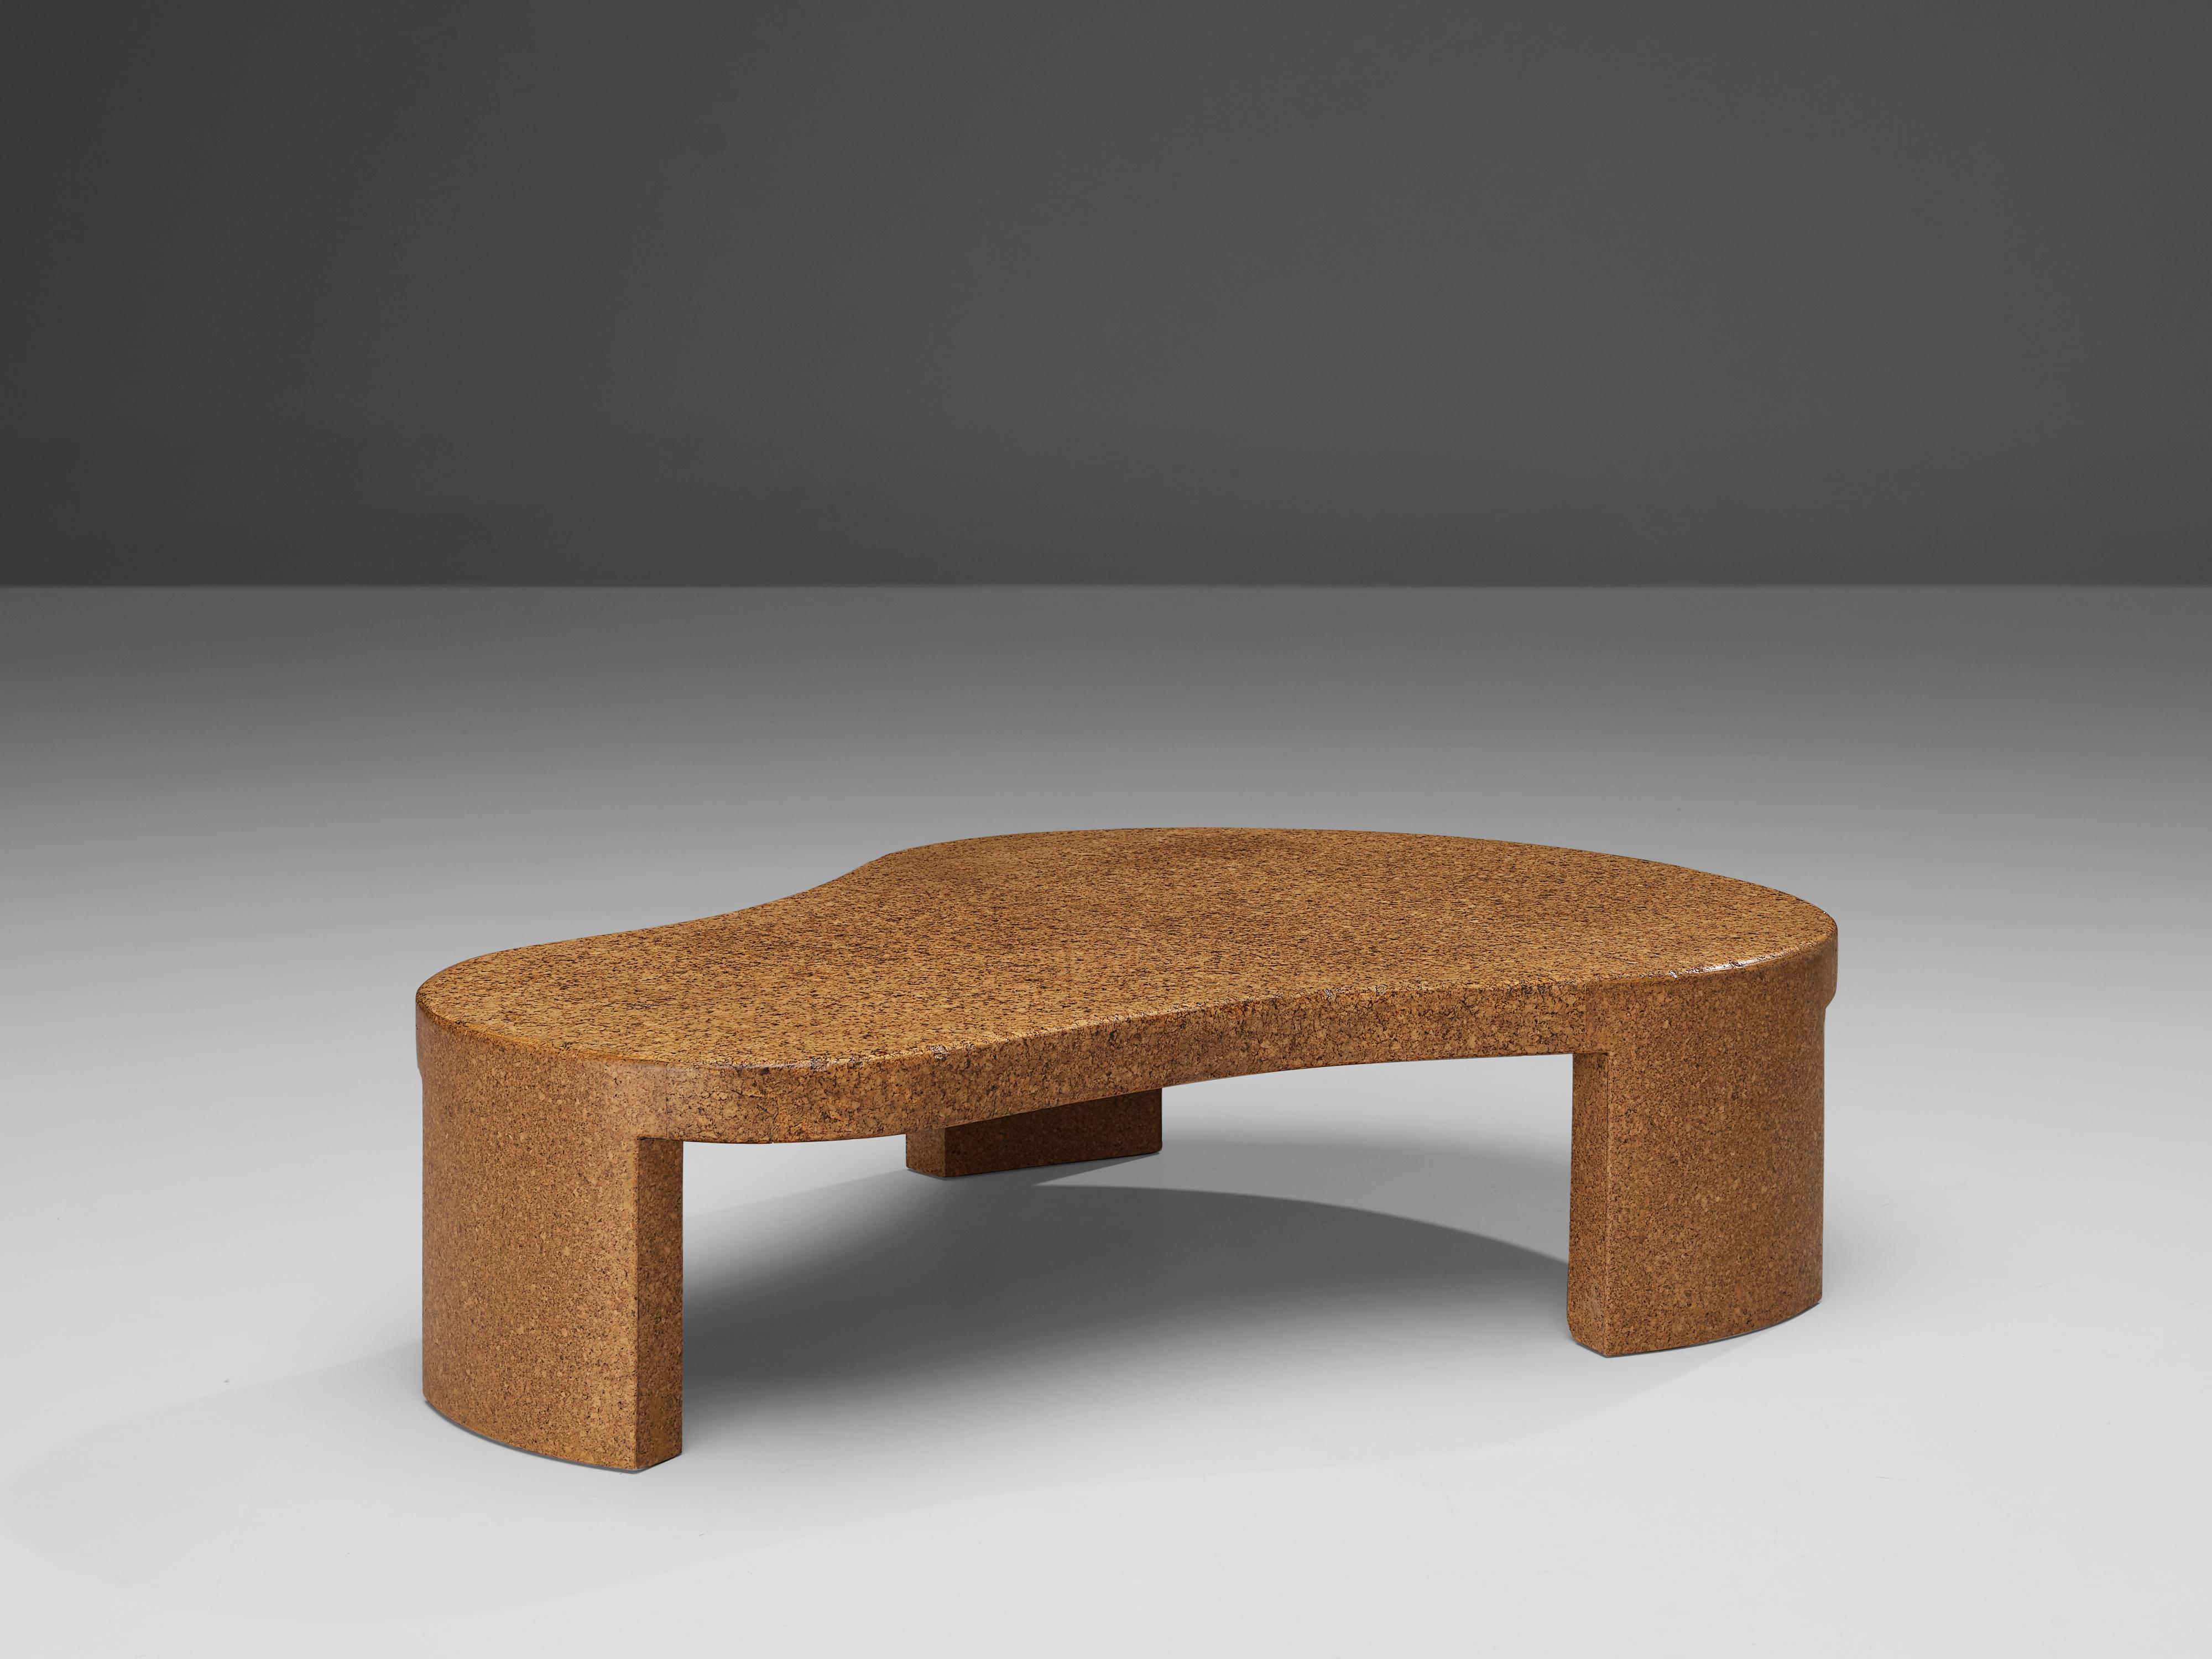 Paul Frankl for Johnson Furniture Company, coffee table model 5025, cork, wood, United States, 1950s

Paul Frankl who became famous first with his 'skyscraper furniture' in 1920s and later on got very popular due to his freeform designs with or in